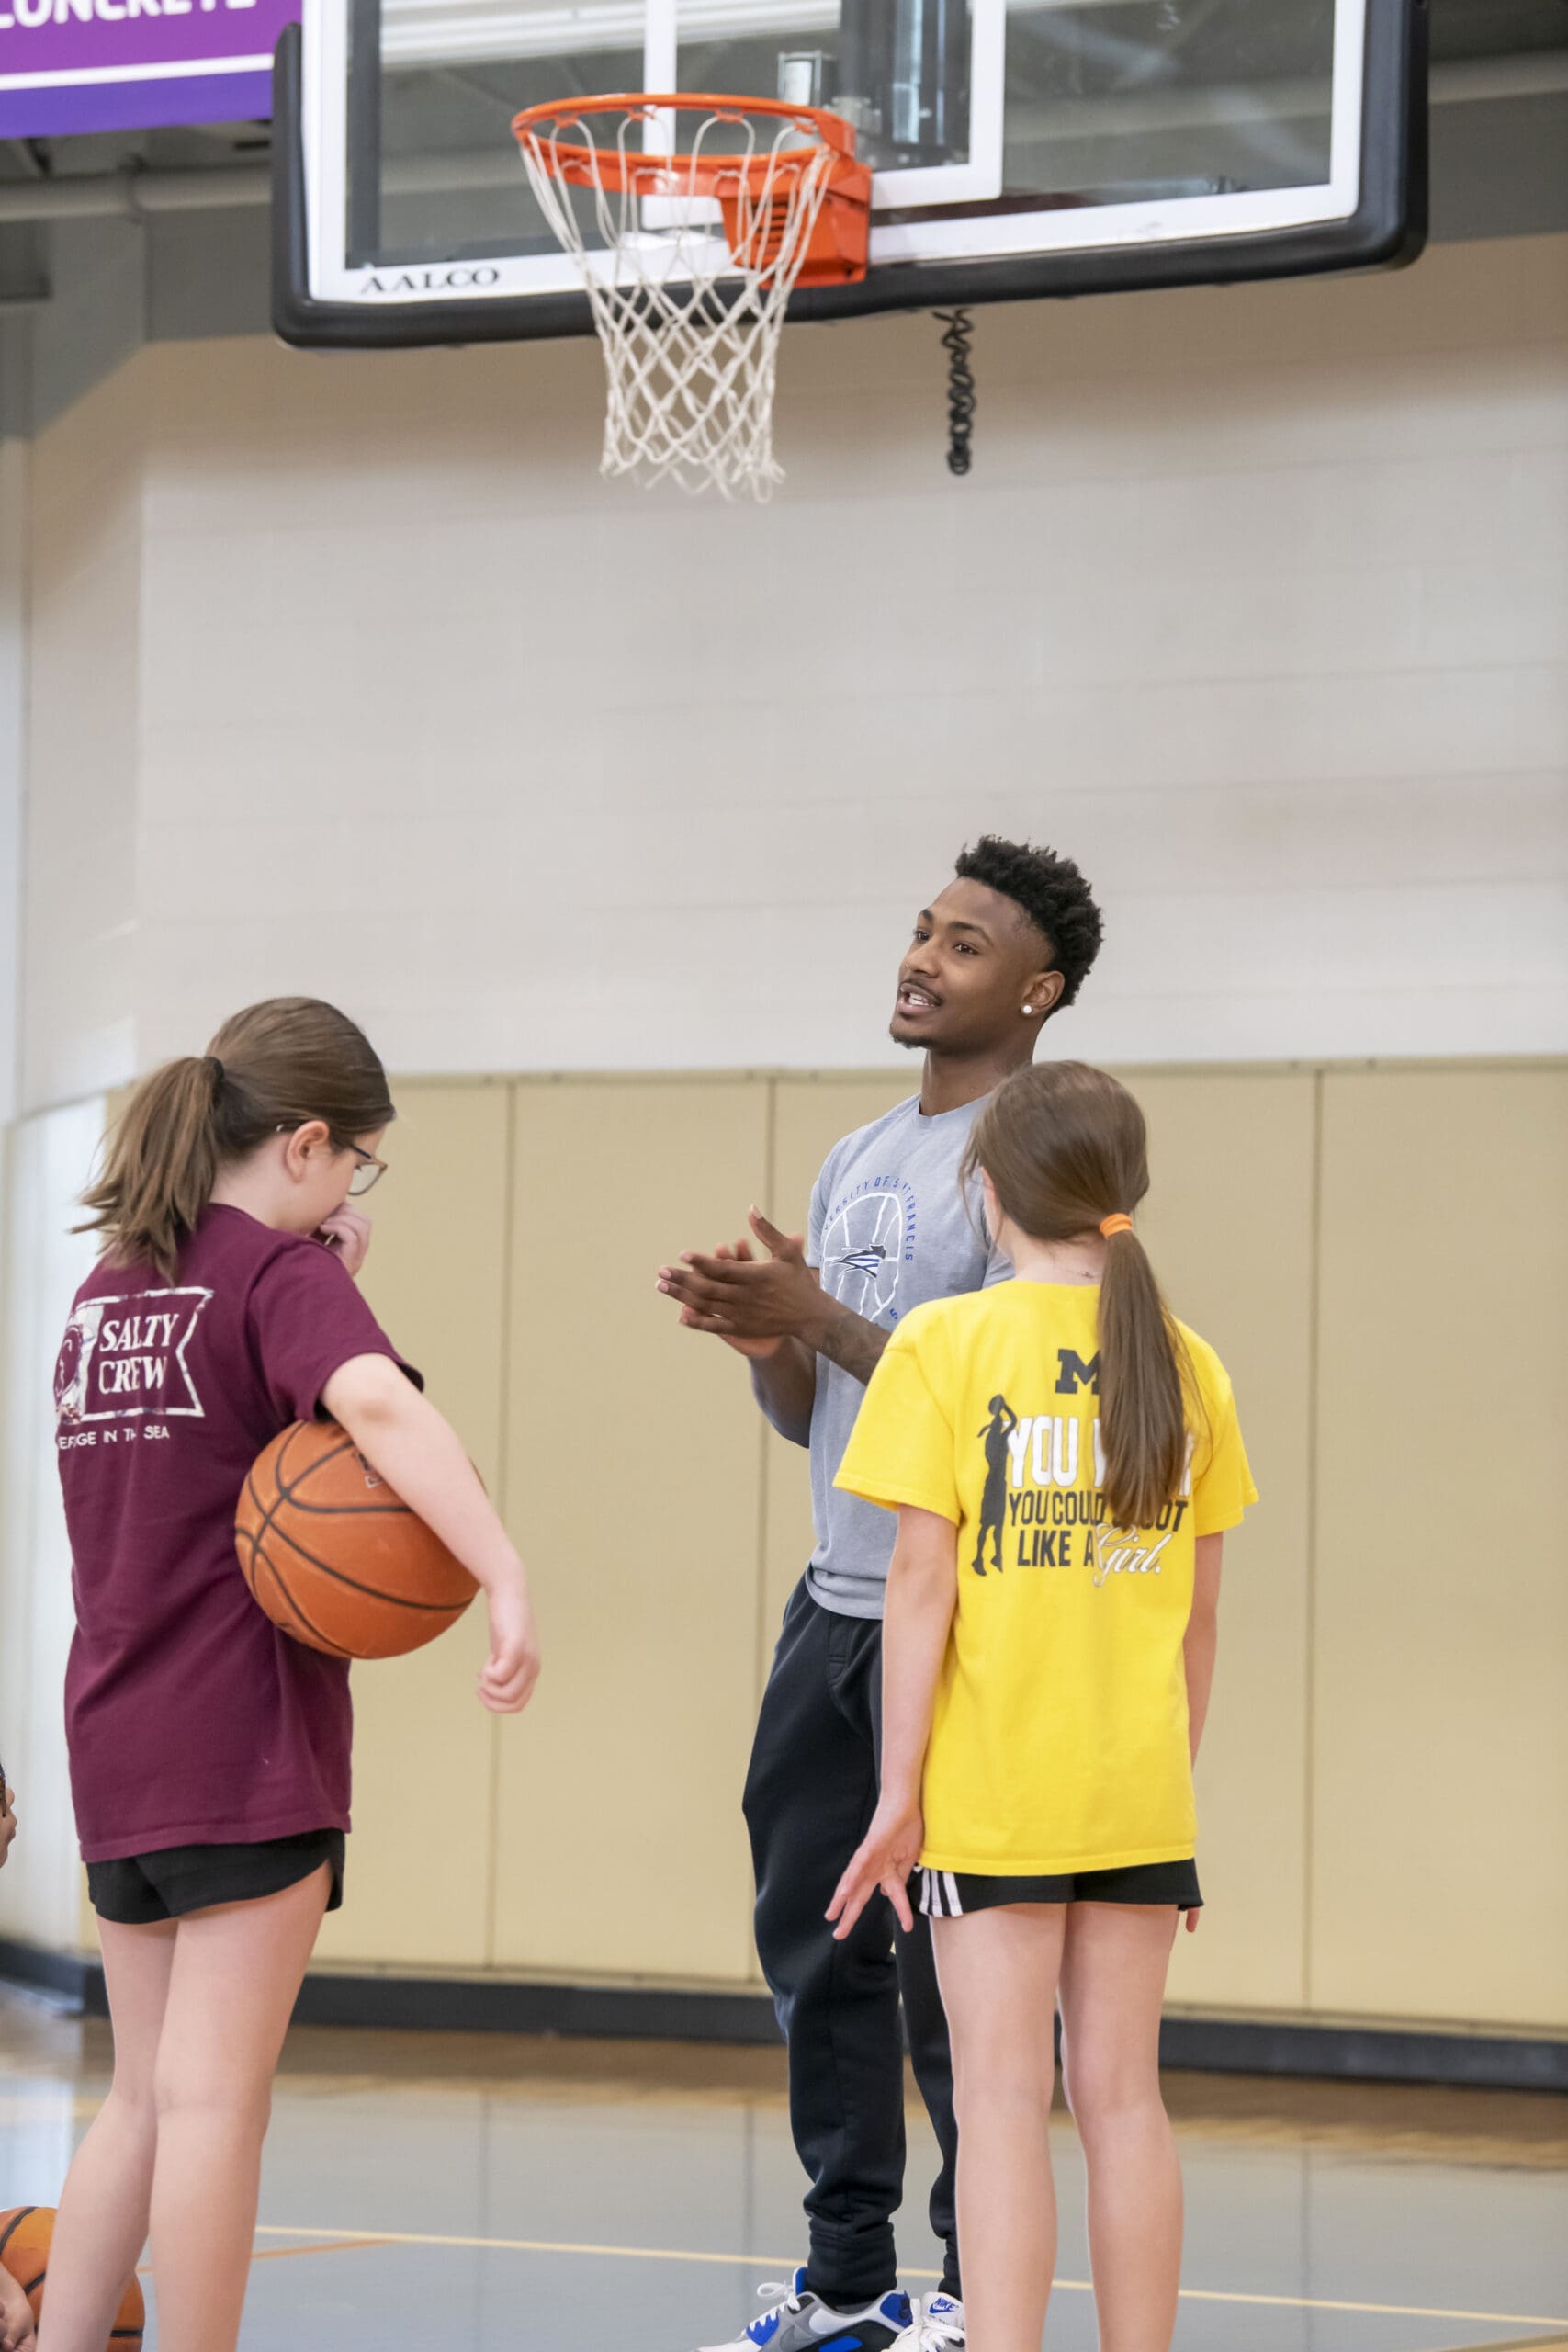 Student instructors coach young students on basketball.